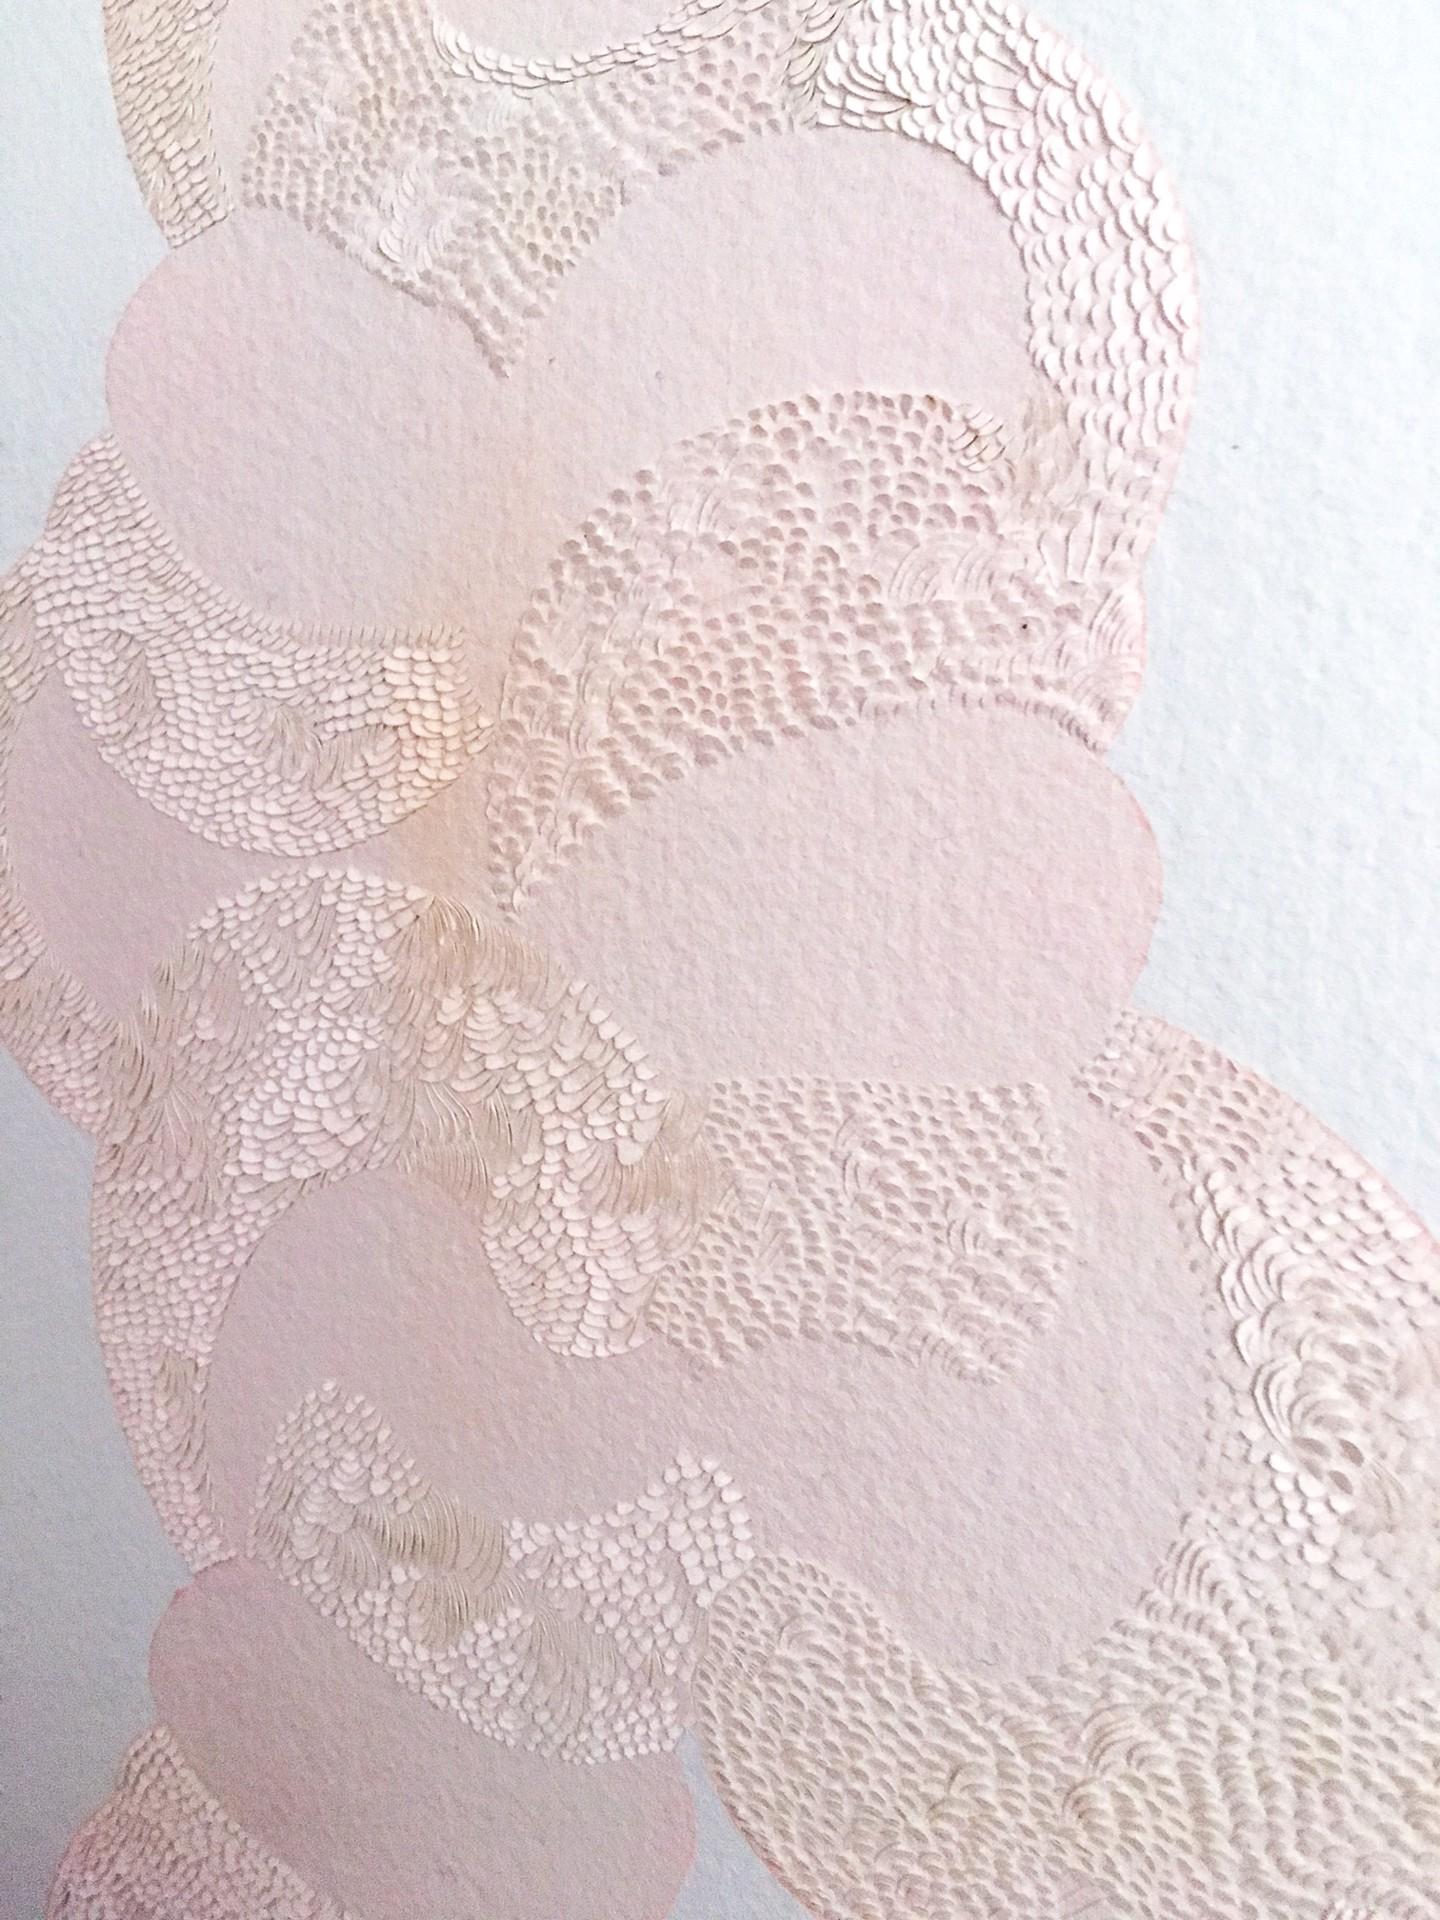 Knife Drawing III - Manipulated Textured Paper with Stunning Detail (Pink) - Art by Lucha Rodriguez